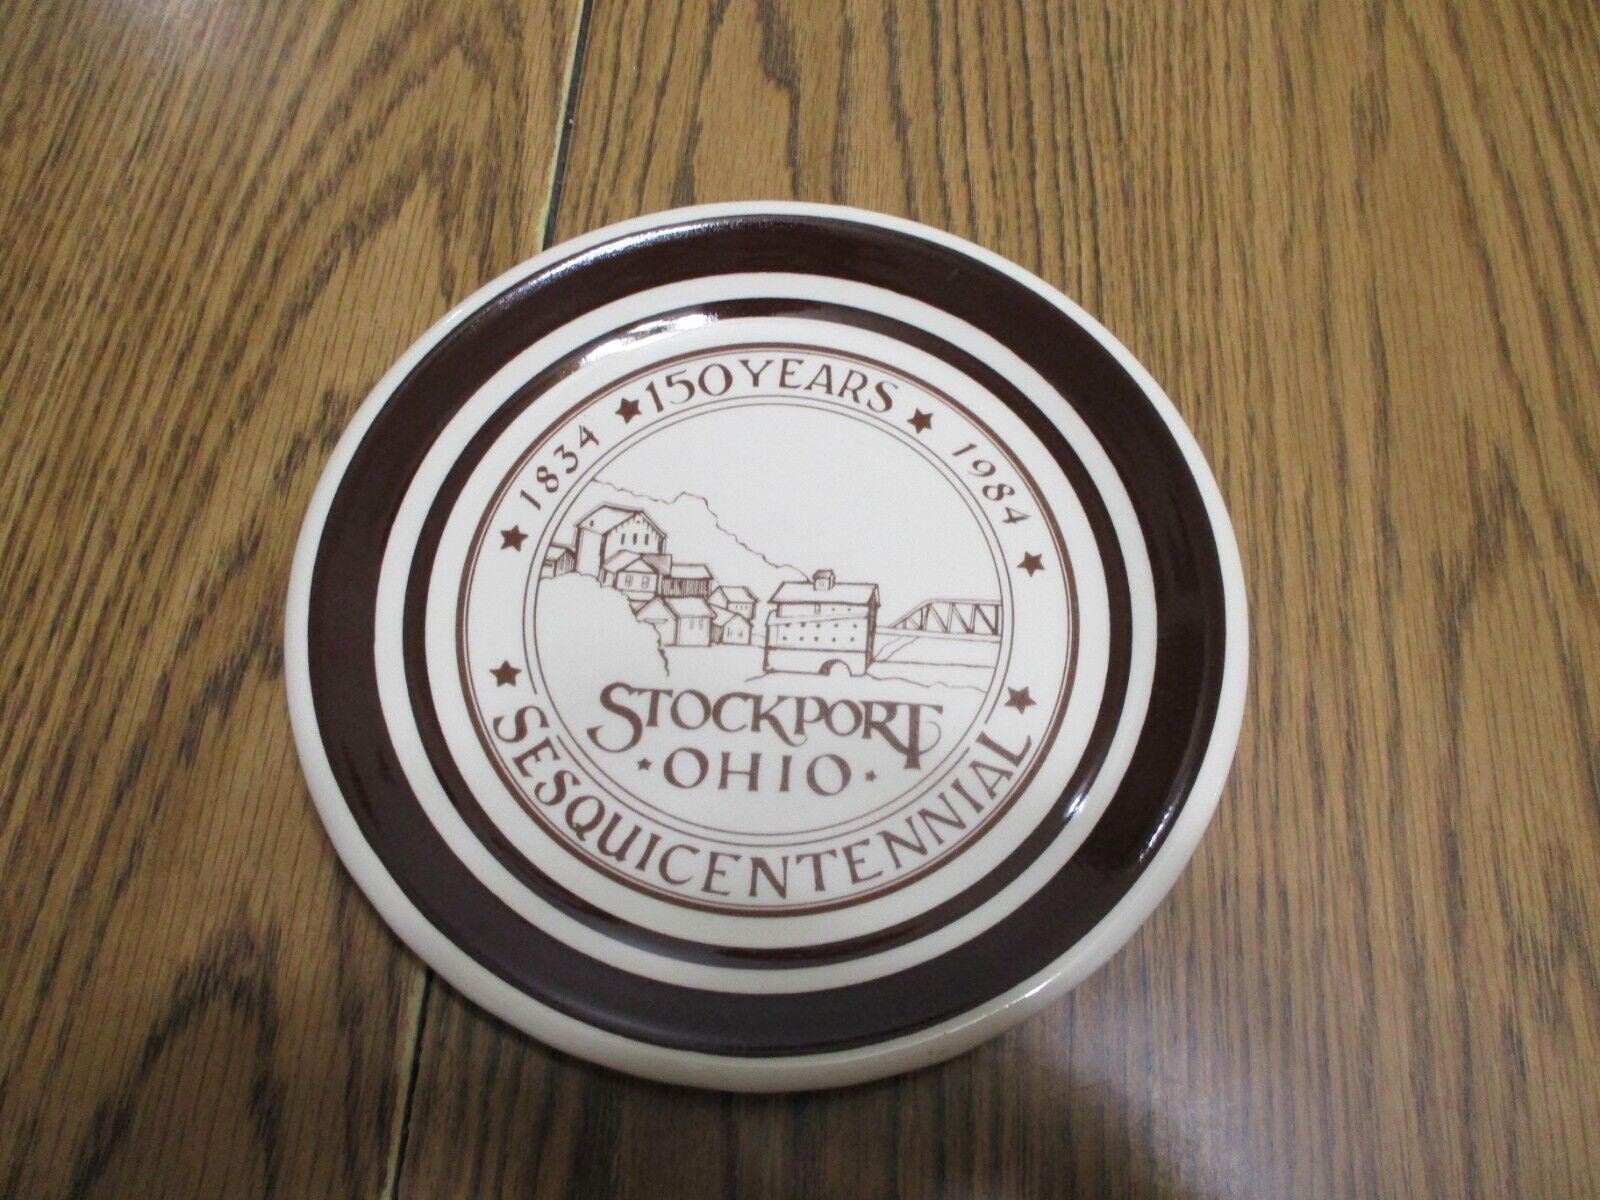 1984 STOCKPORT OHIO SESQUICENTENNIAL PLATE  7 1/2 INCH 1934-1984 150 YEARS